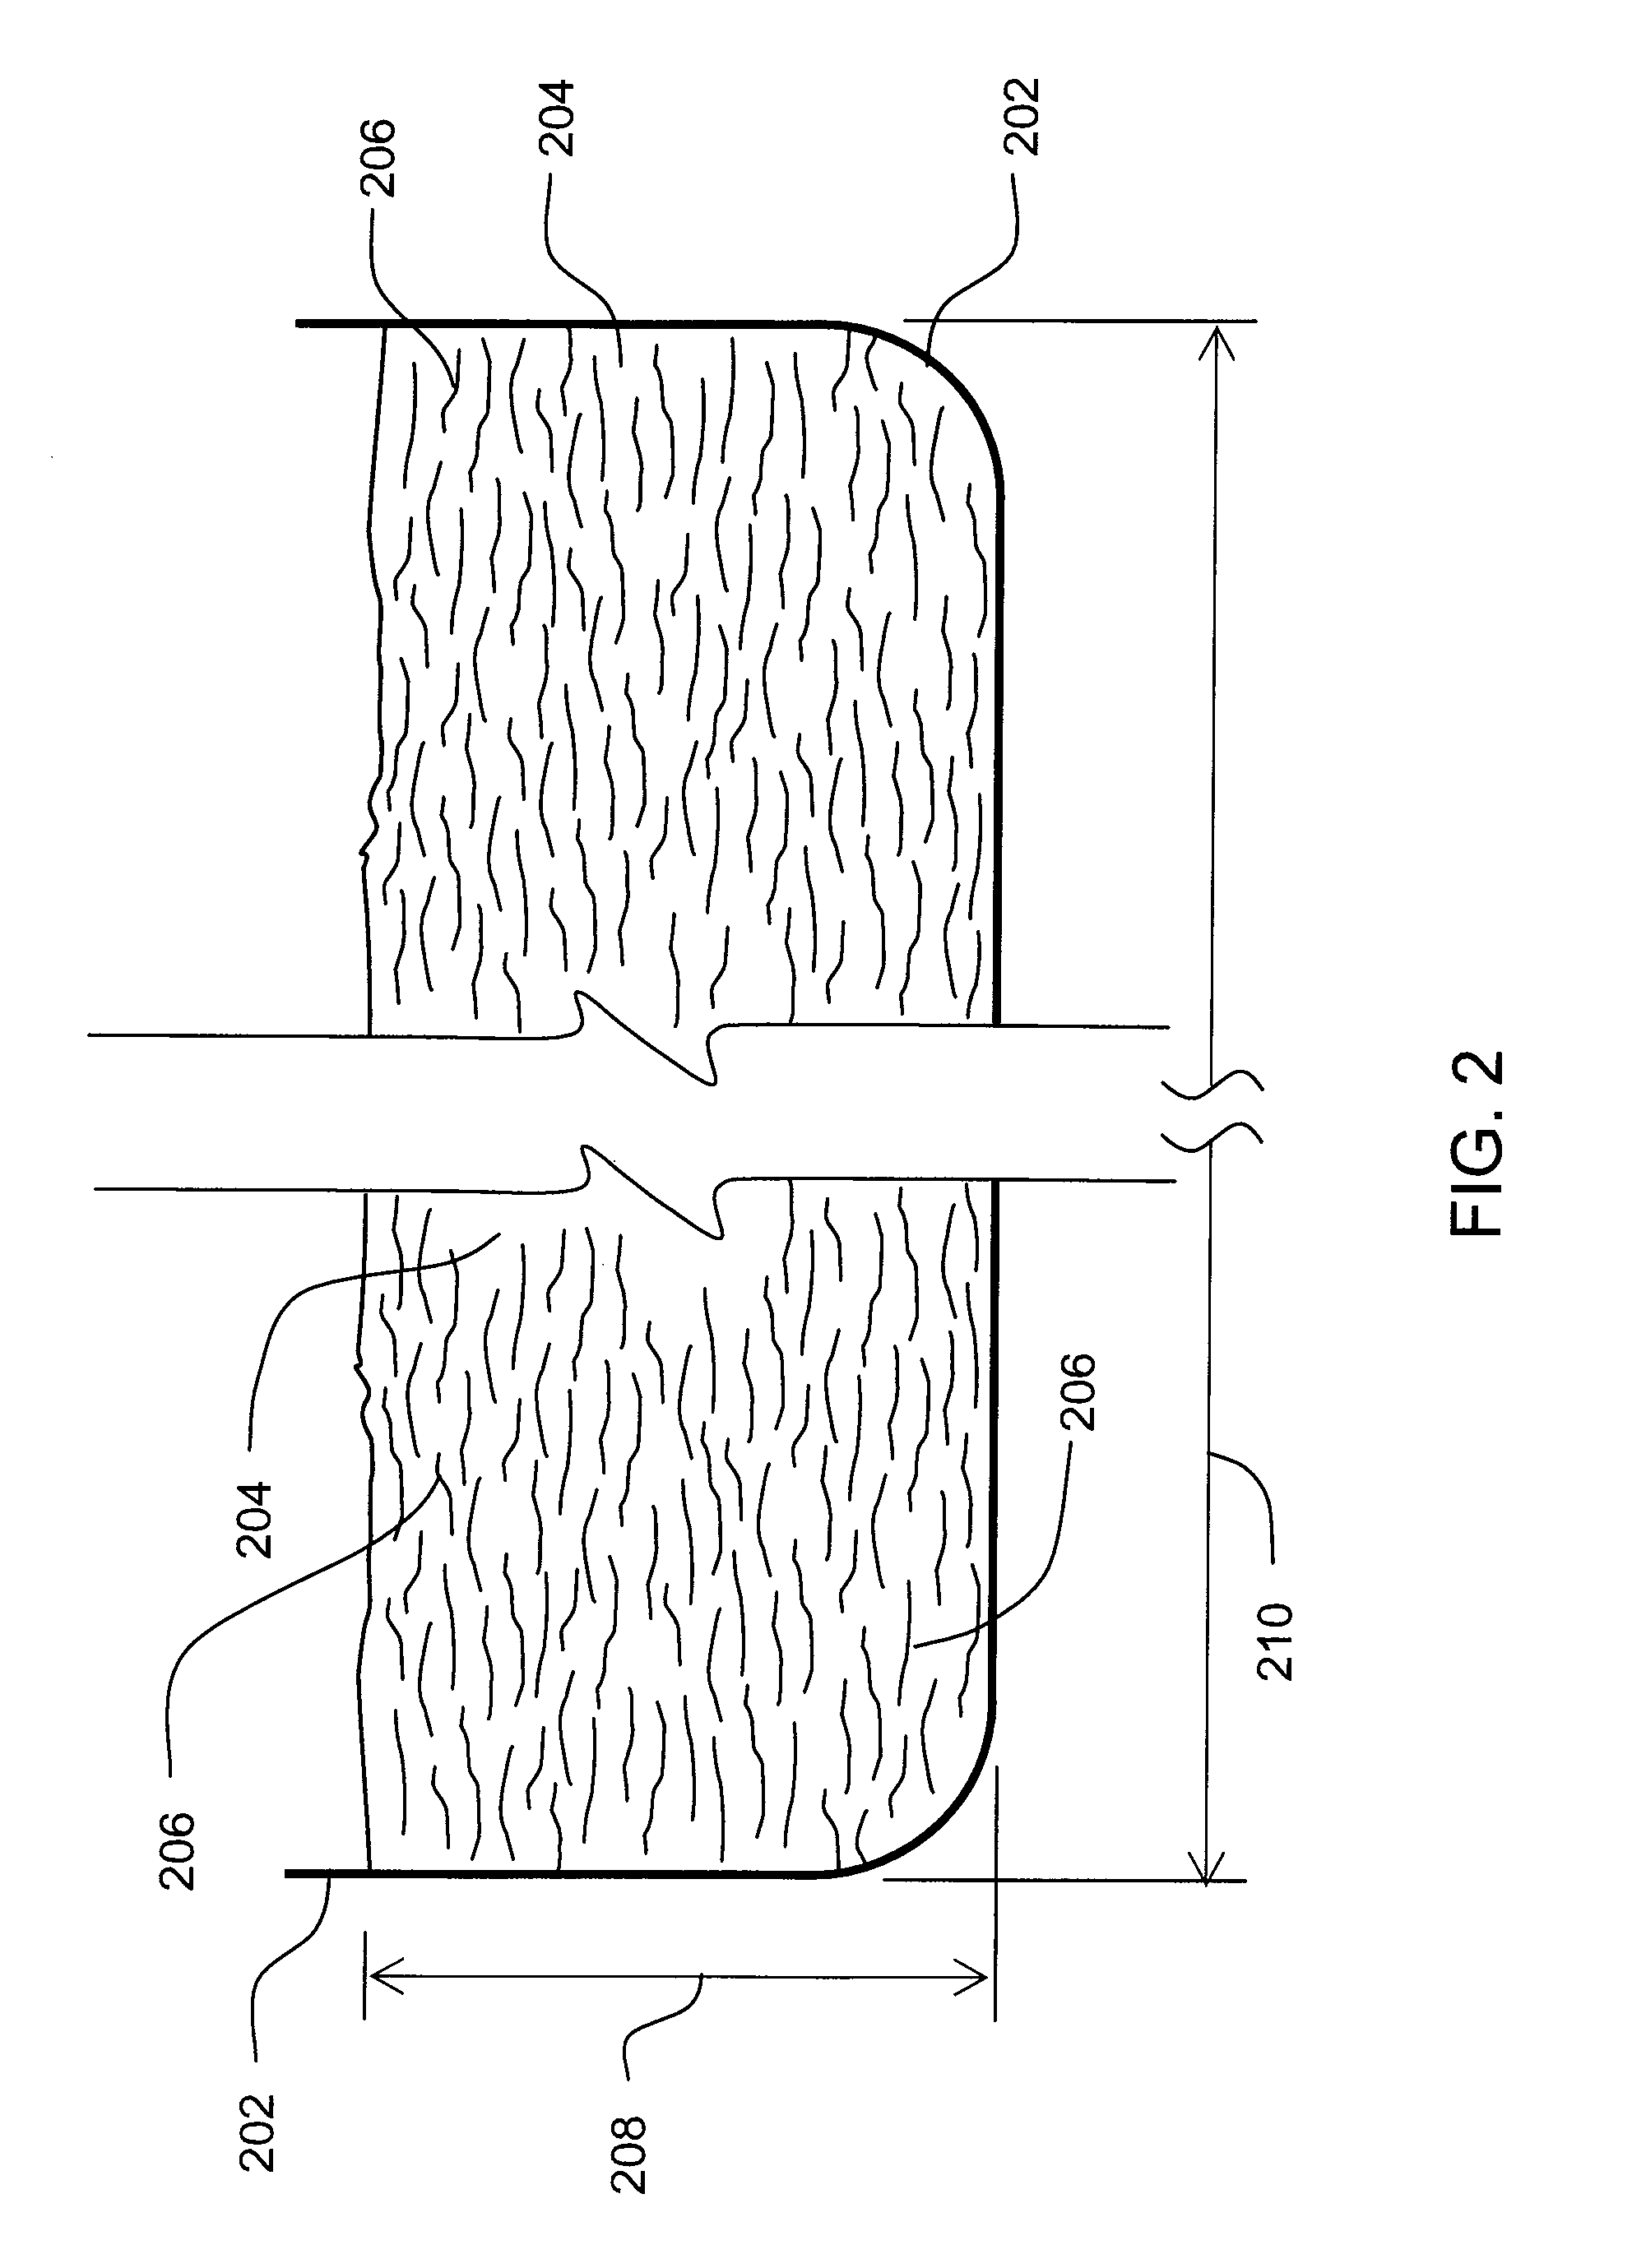 Low embodied energy sheathing panels with optimal water vapor permeance and methods of making same